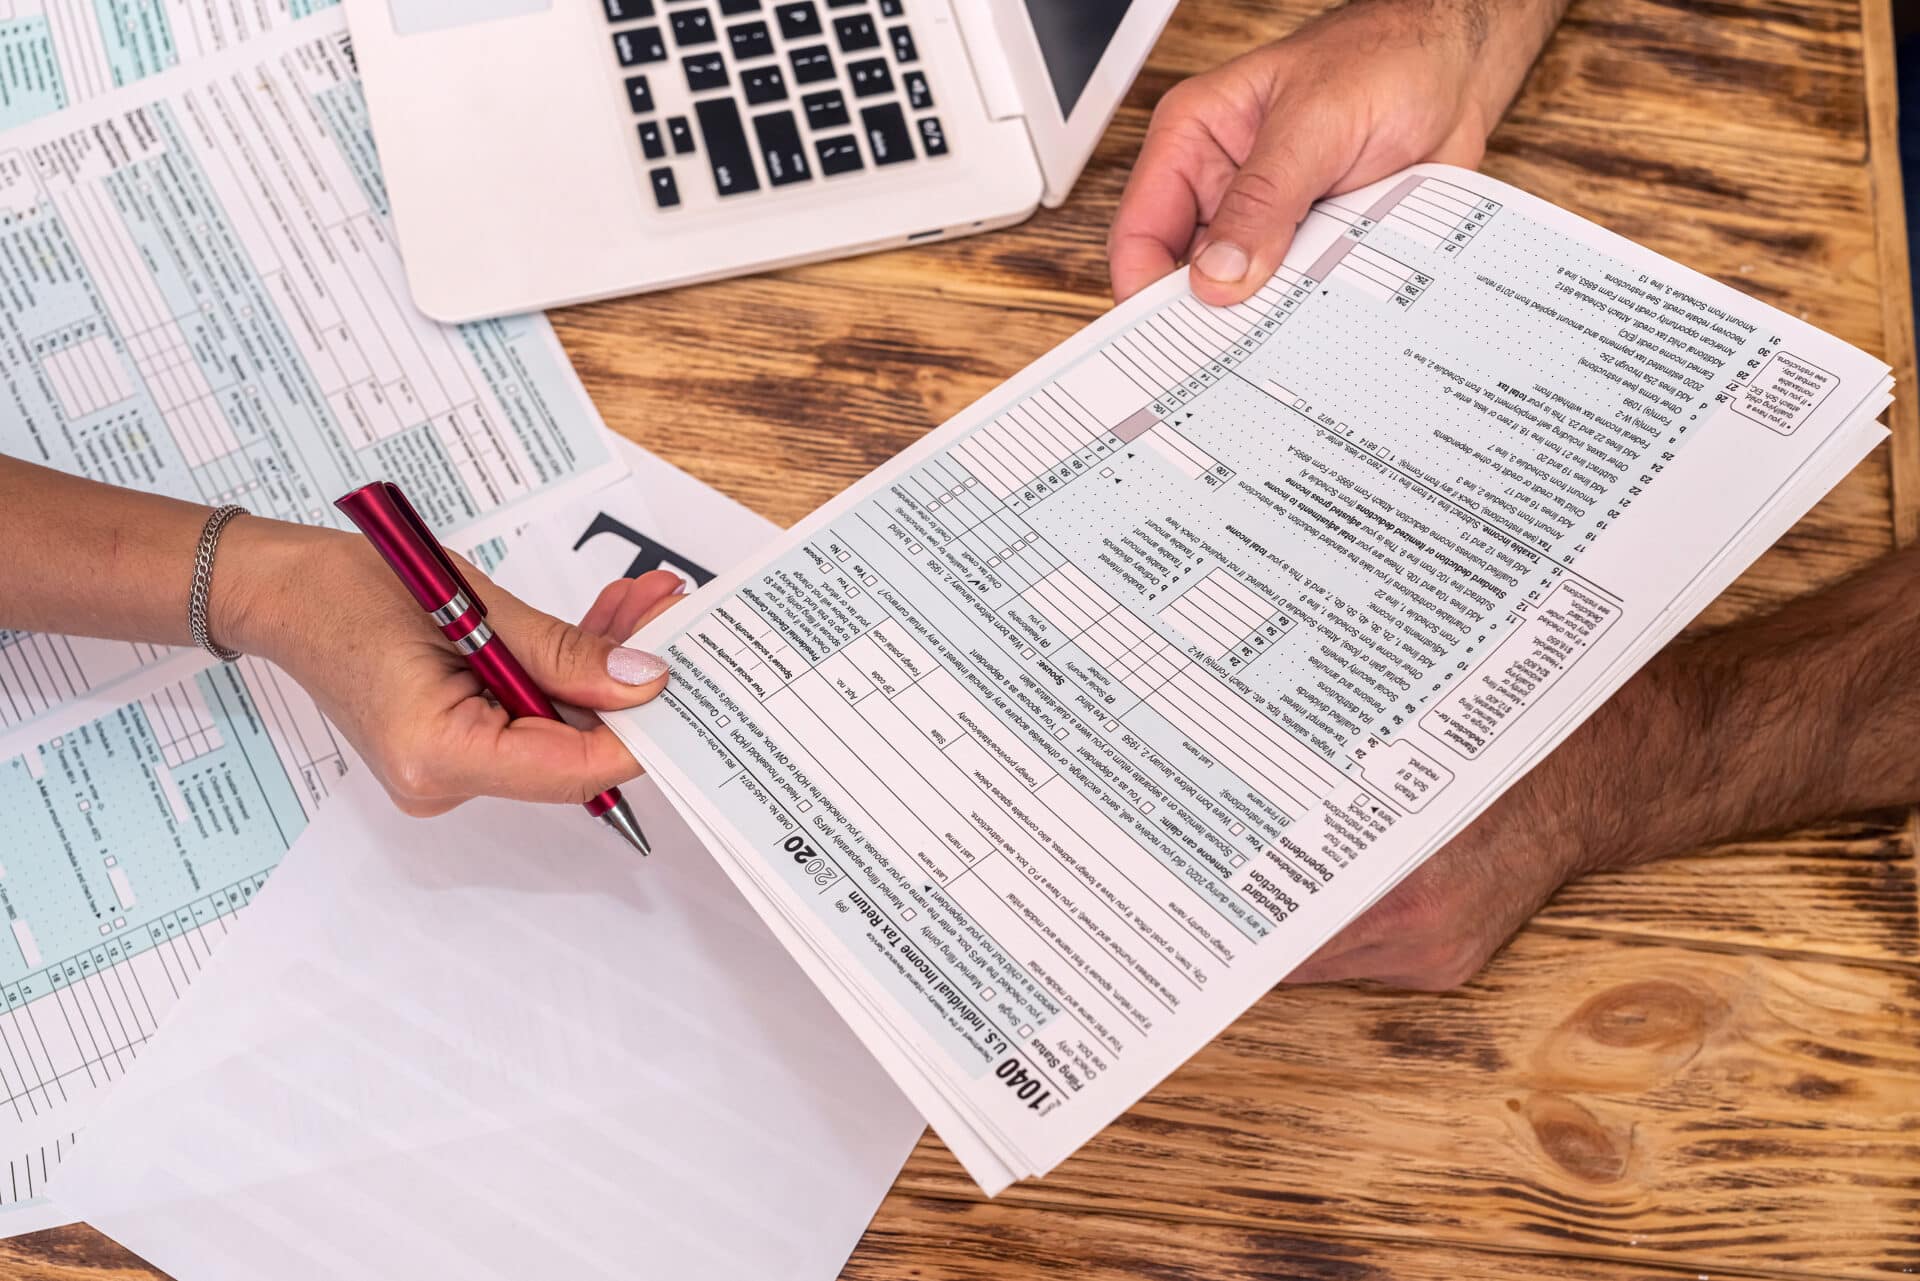 6 Essential Habits to Adopt After Filing Your Taxes for Stress-Free Tax Season